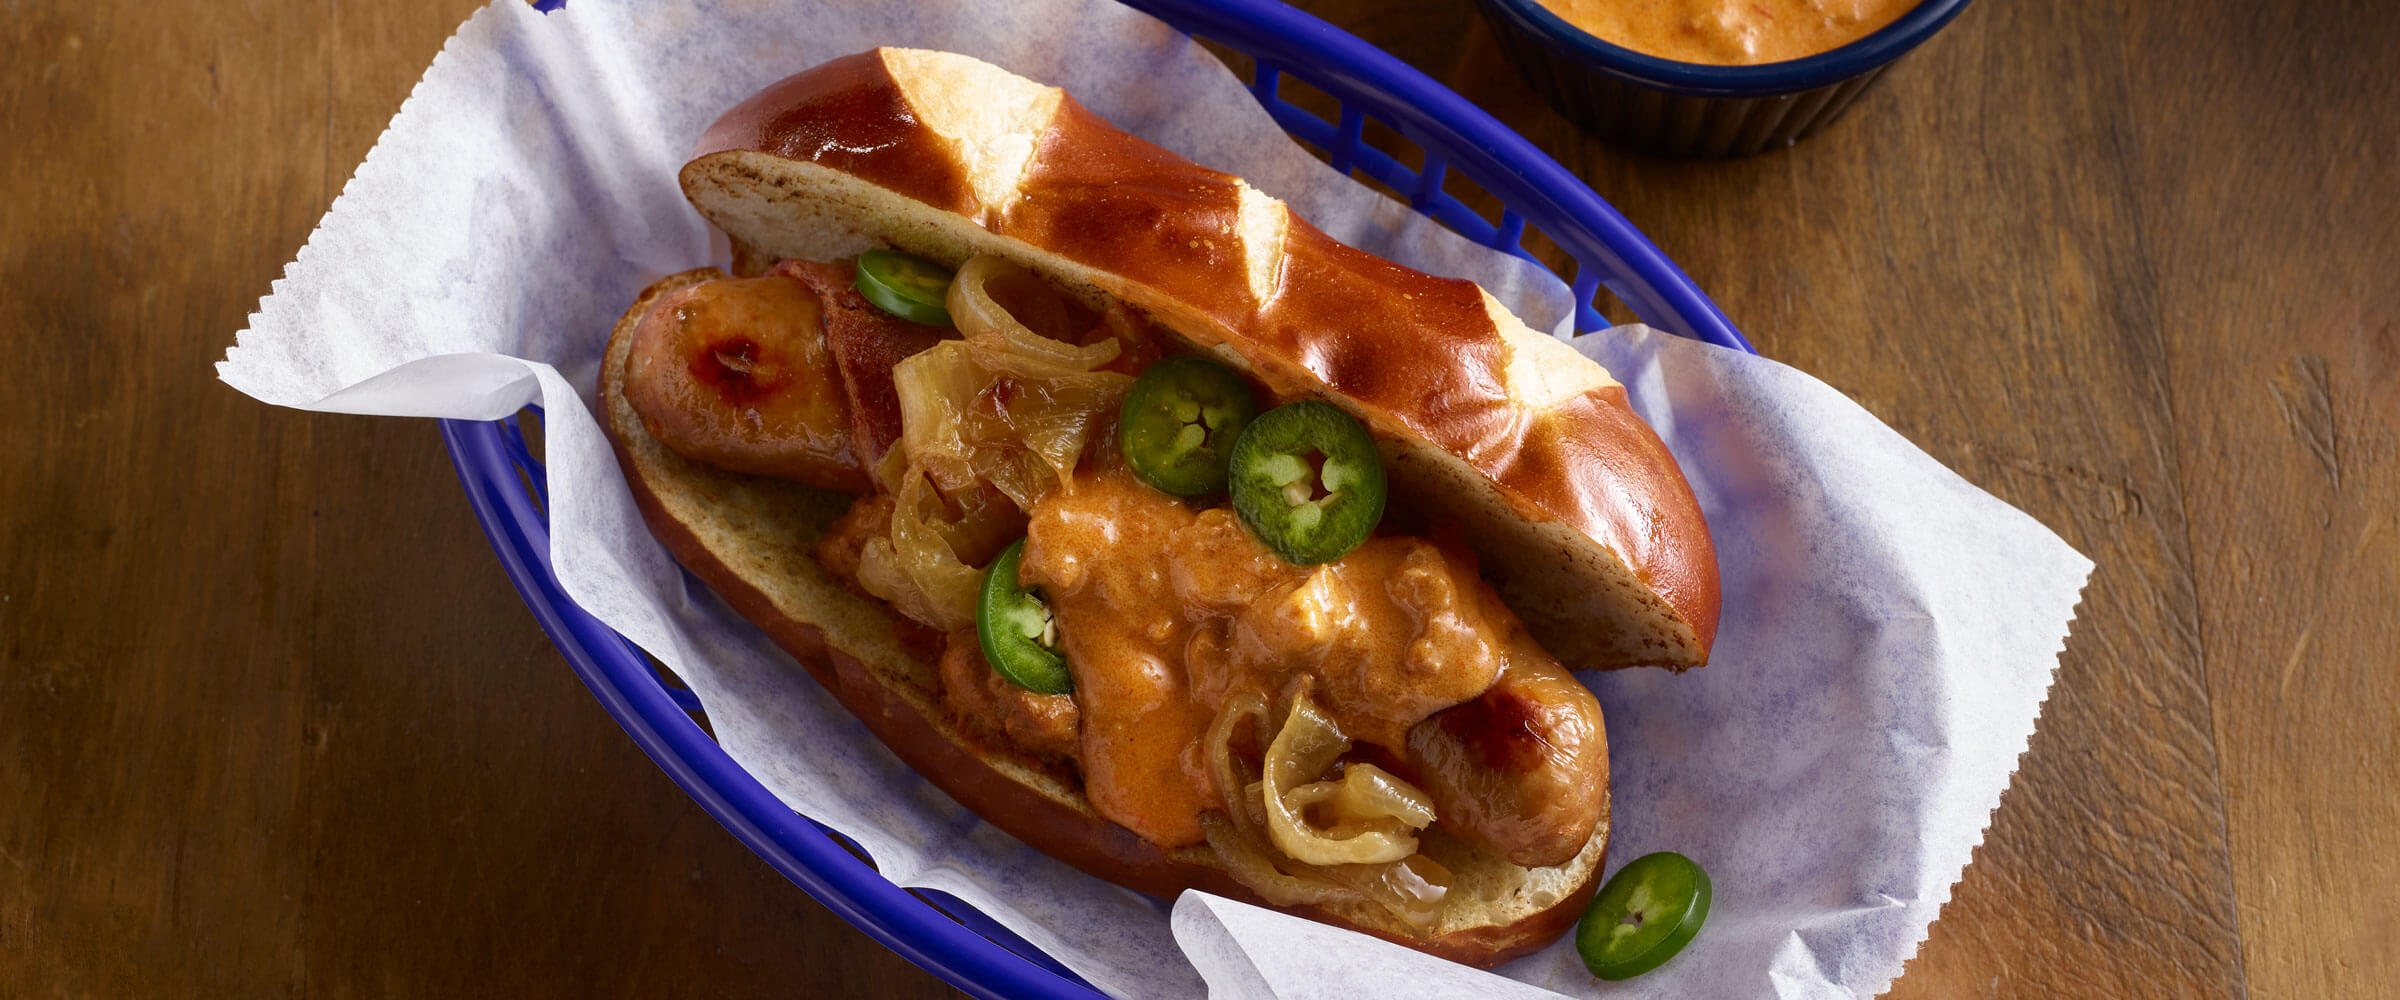 Chili Beer Cheese Bacon Brat topped with jalapenos on white paper in blue basket